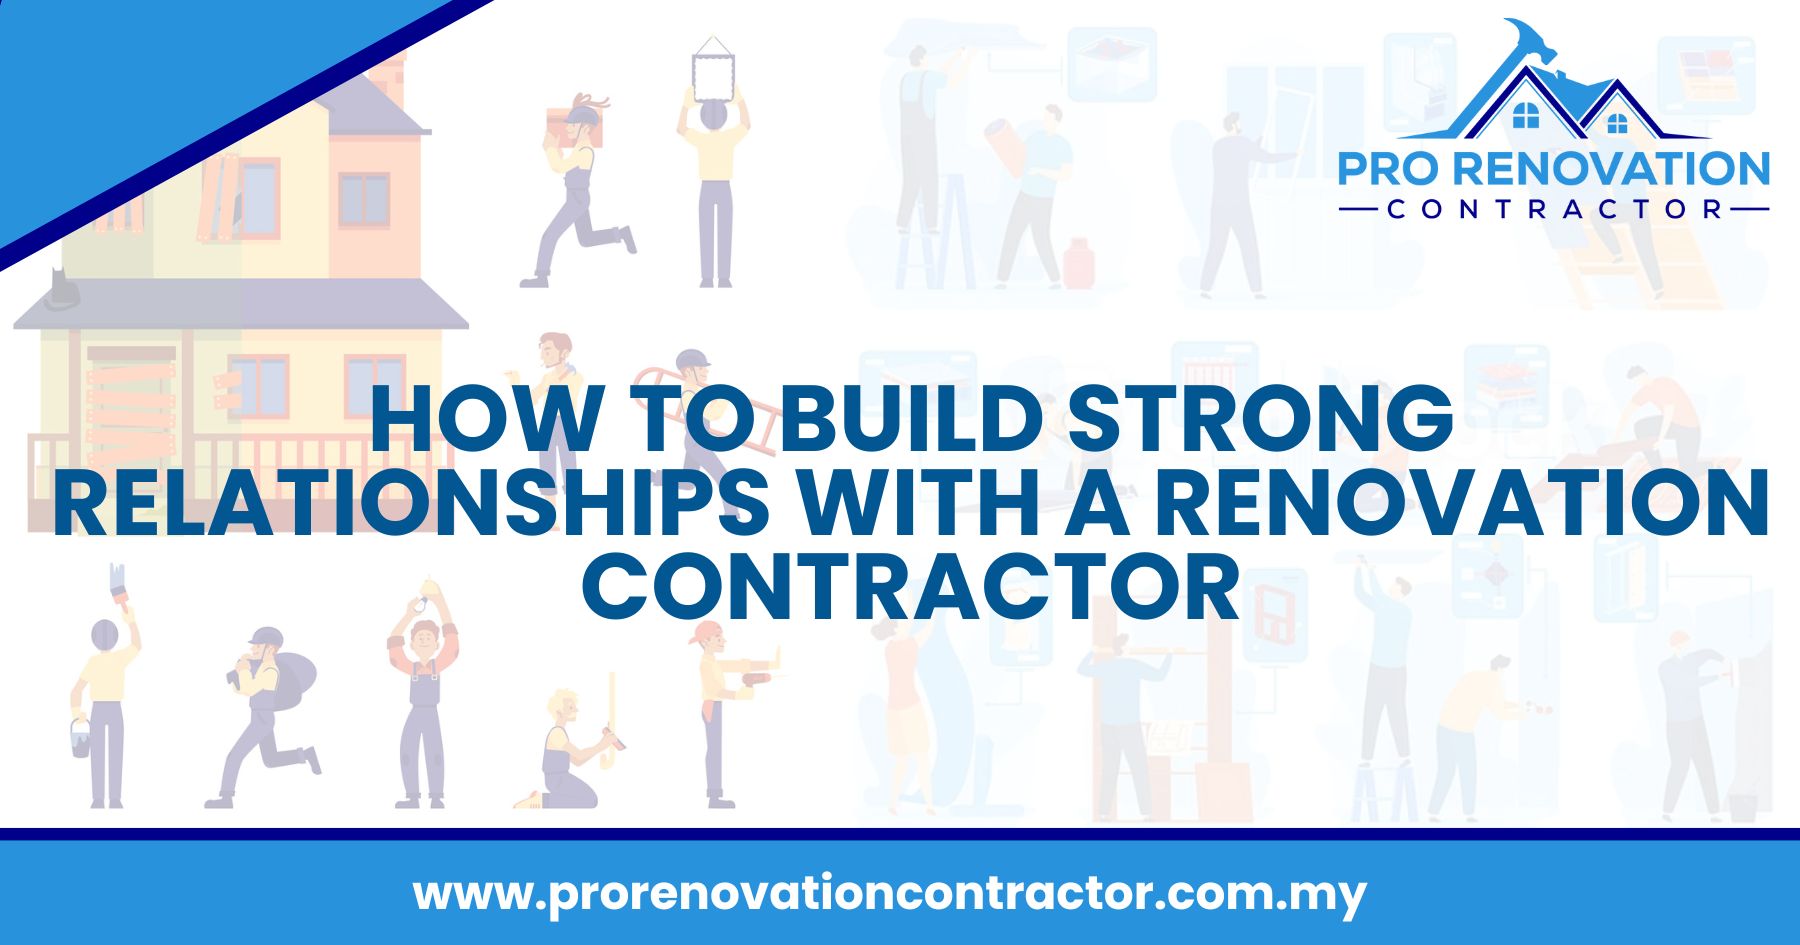 How to Build Strong Relationships with a Renovation Contractor